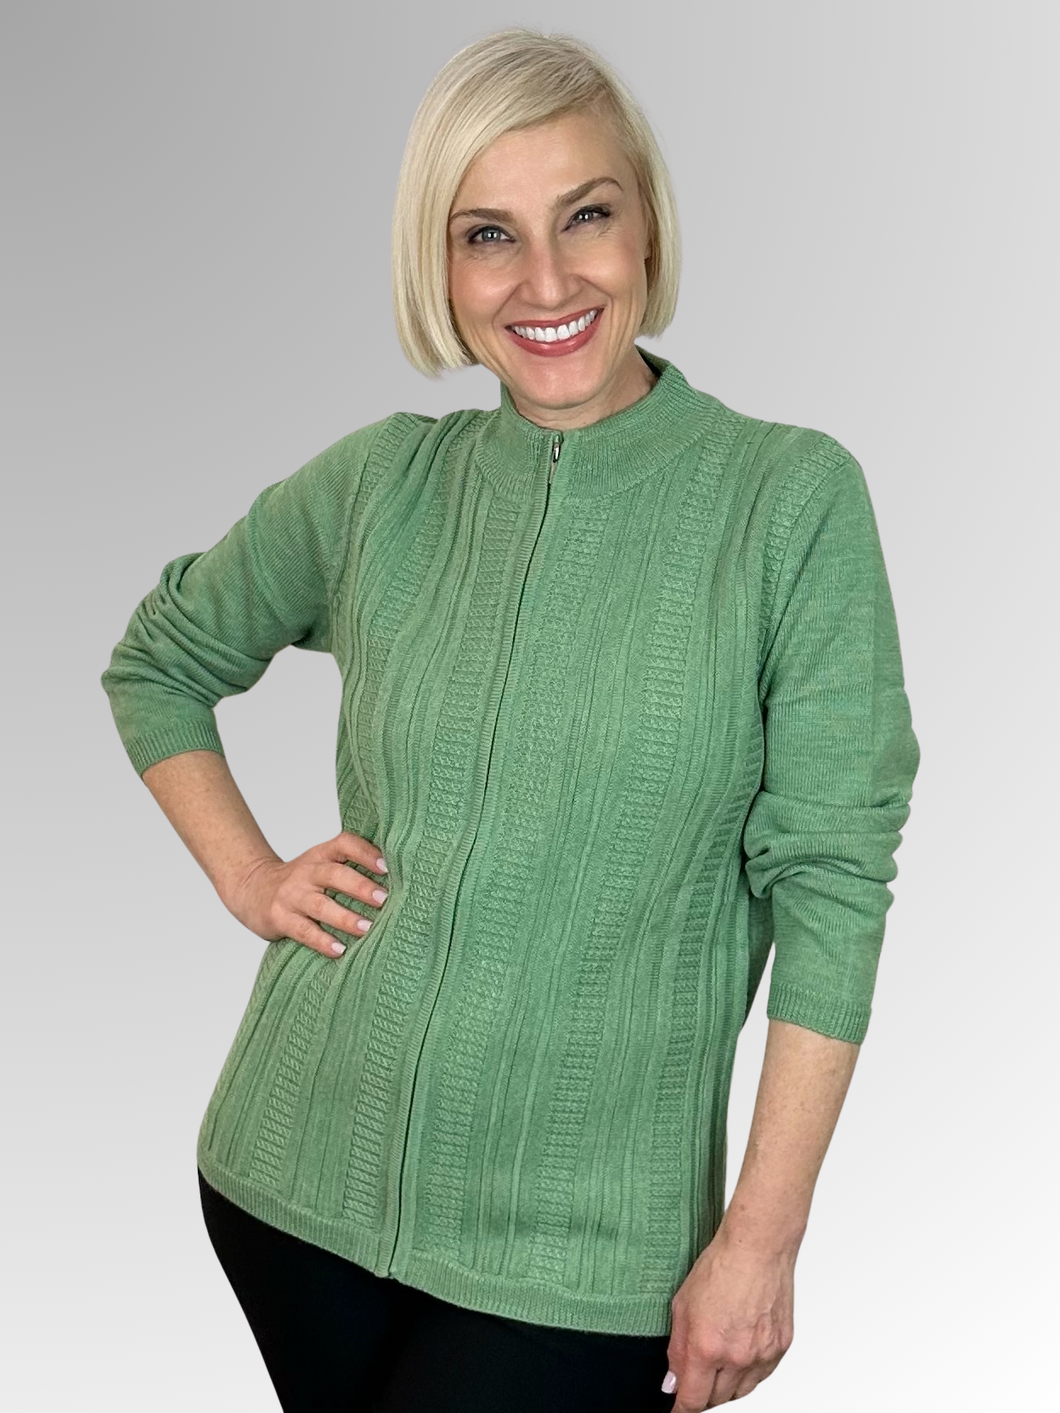 Slade Knitwear is a well-known Australian brand with a 70-year history of creating high-quality knitwear for women. This Pistachio Zip Front Cardigan, made from 100% Wool, is a sporty and versatile addition to any outfit. Slade is the go-to for all your winter knitwear needs!